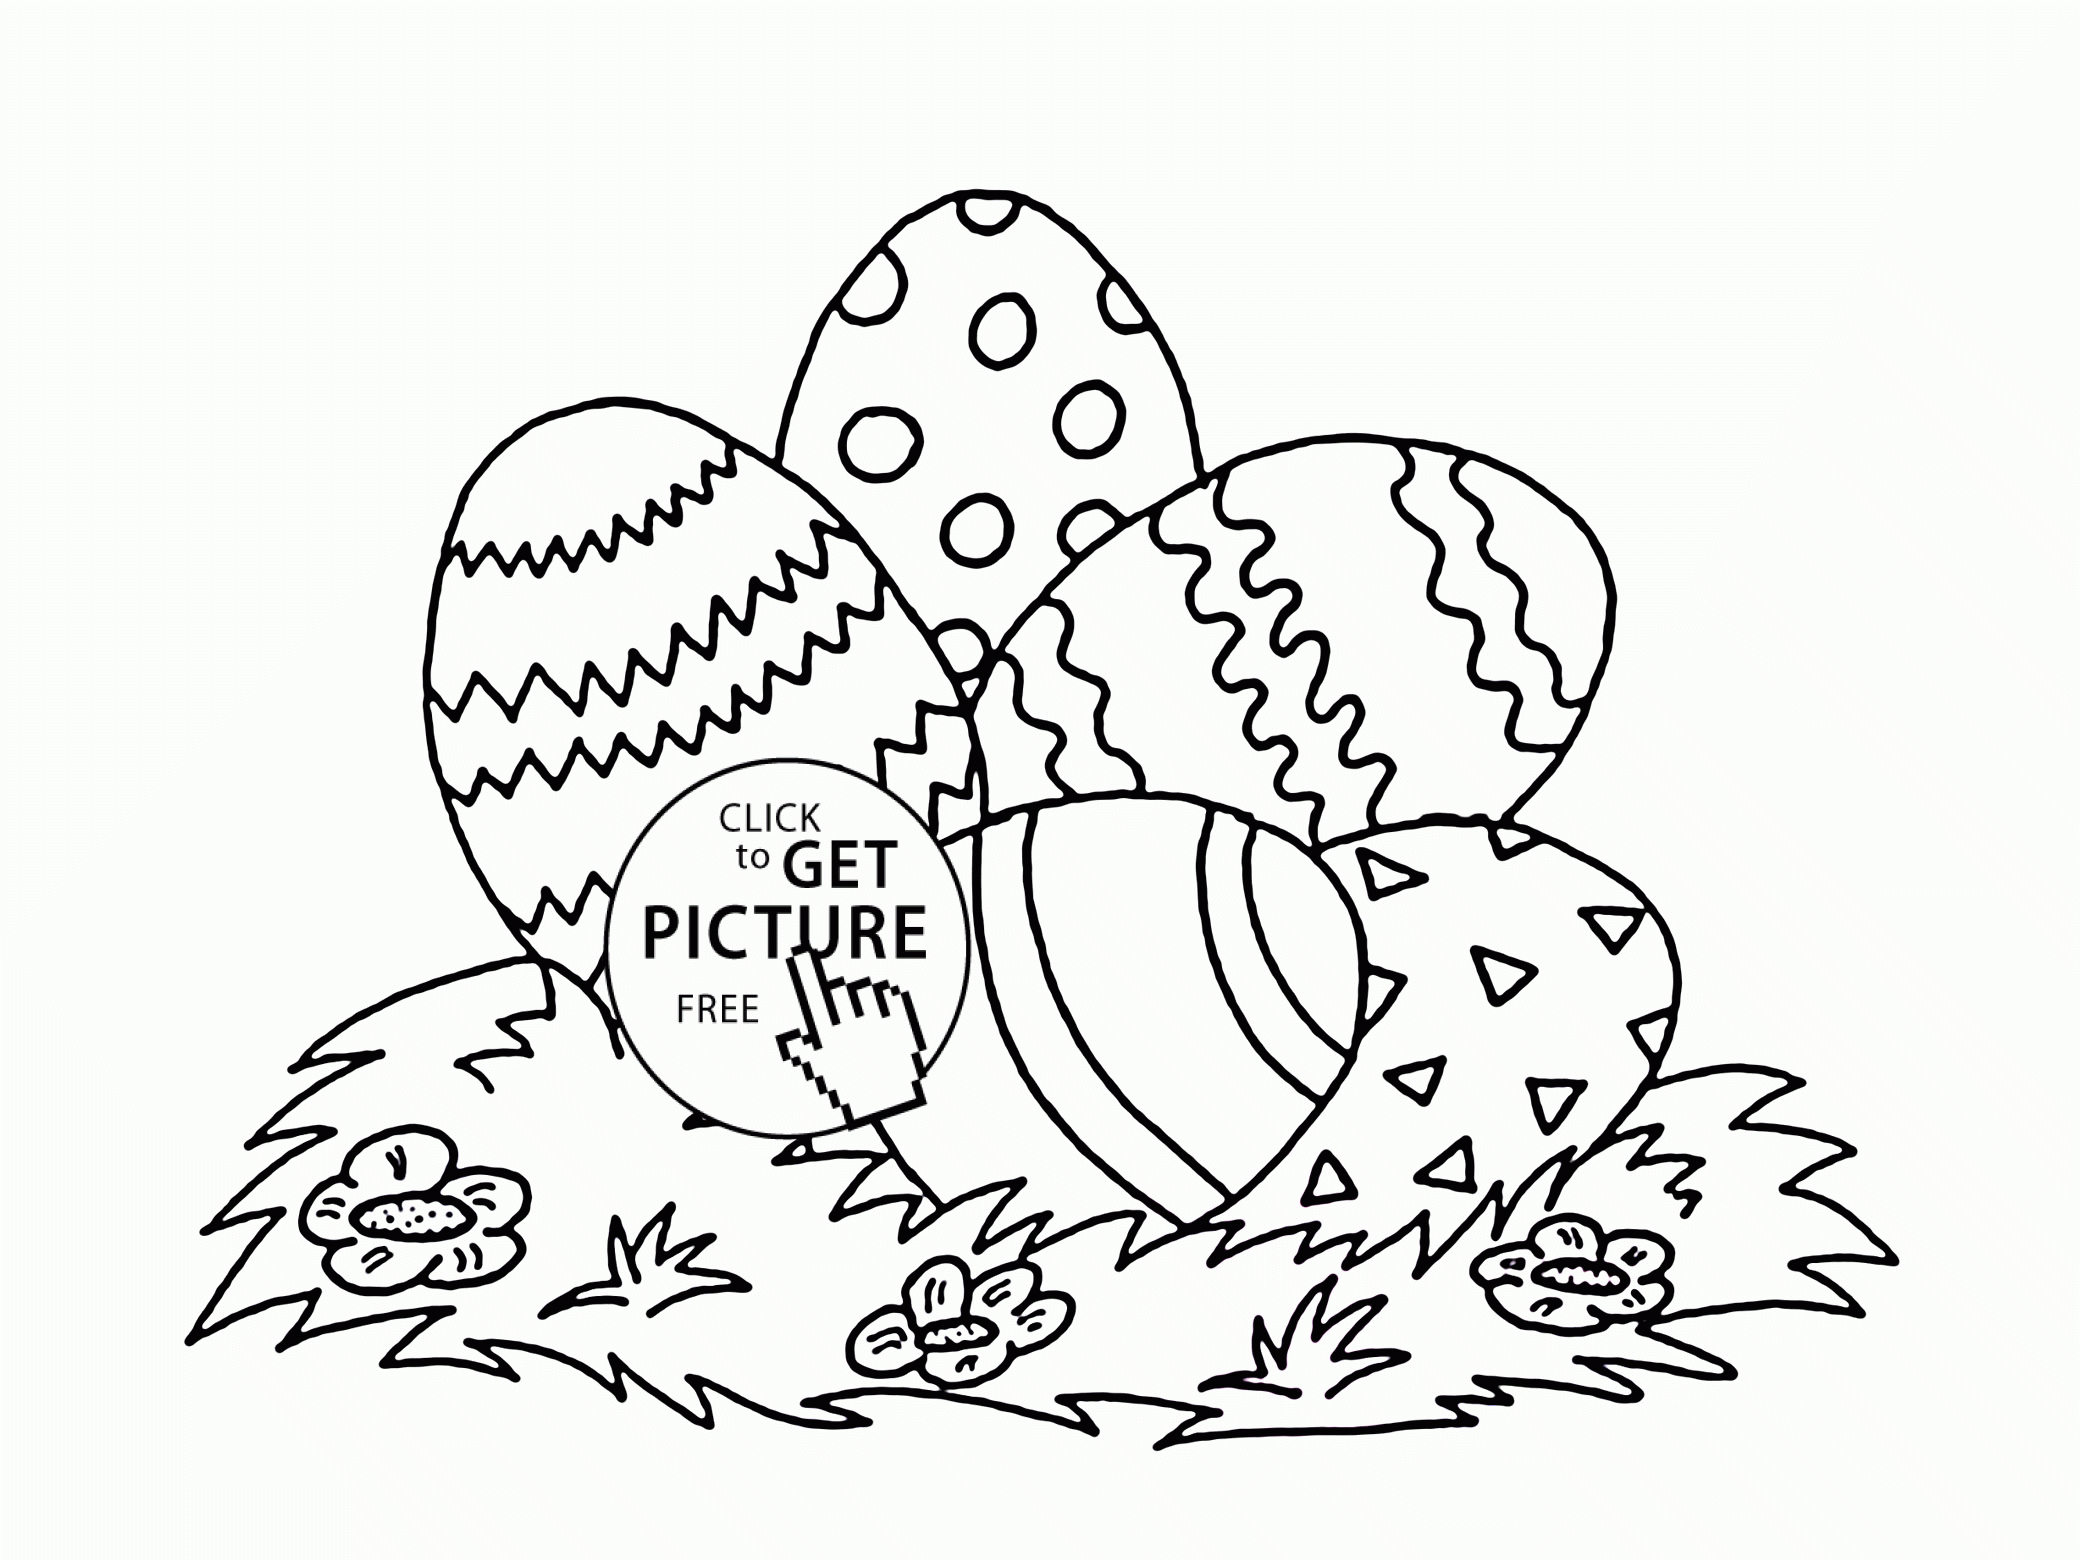 Coloring Pages : Free Easter Coloring Pages To Print Out For - Free Printable Easter Coloring Pictures